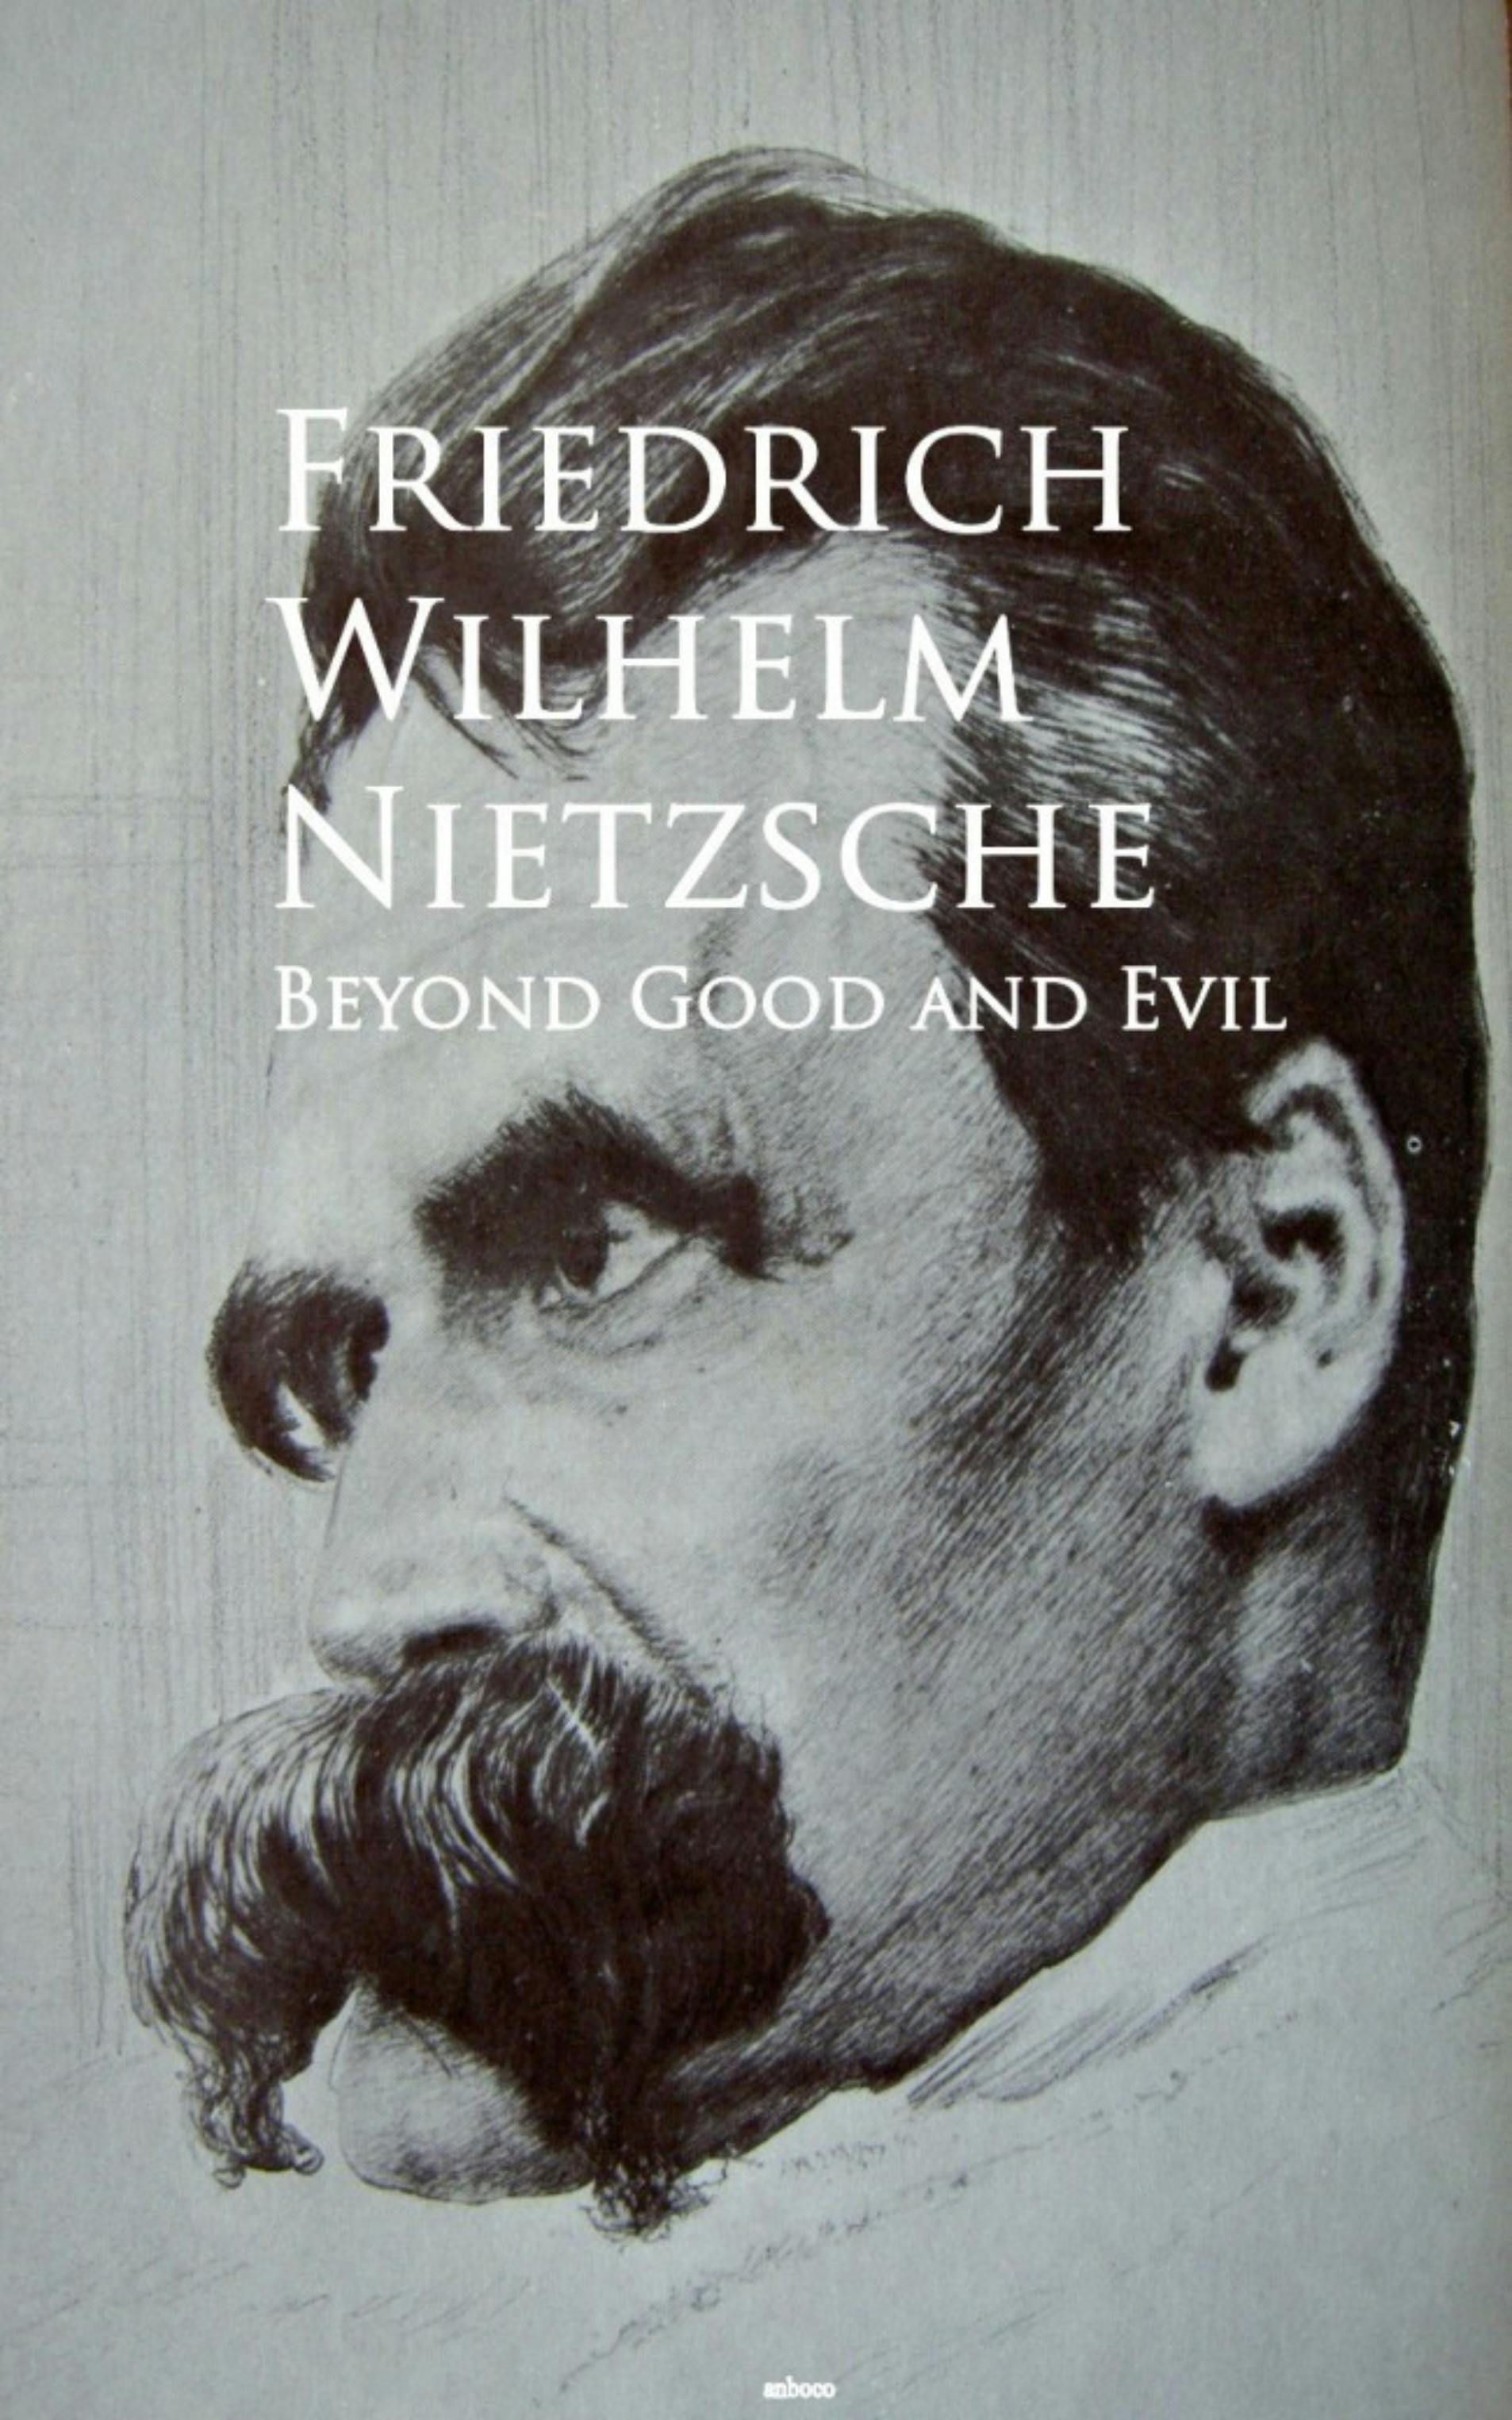 Beyond Good and Evil: Bestsellers and famous Books - Friedrich Wilhelm Nietzsche